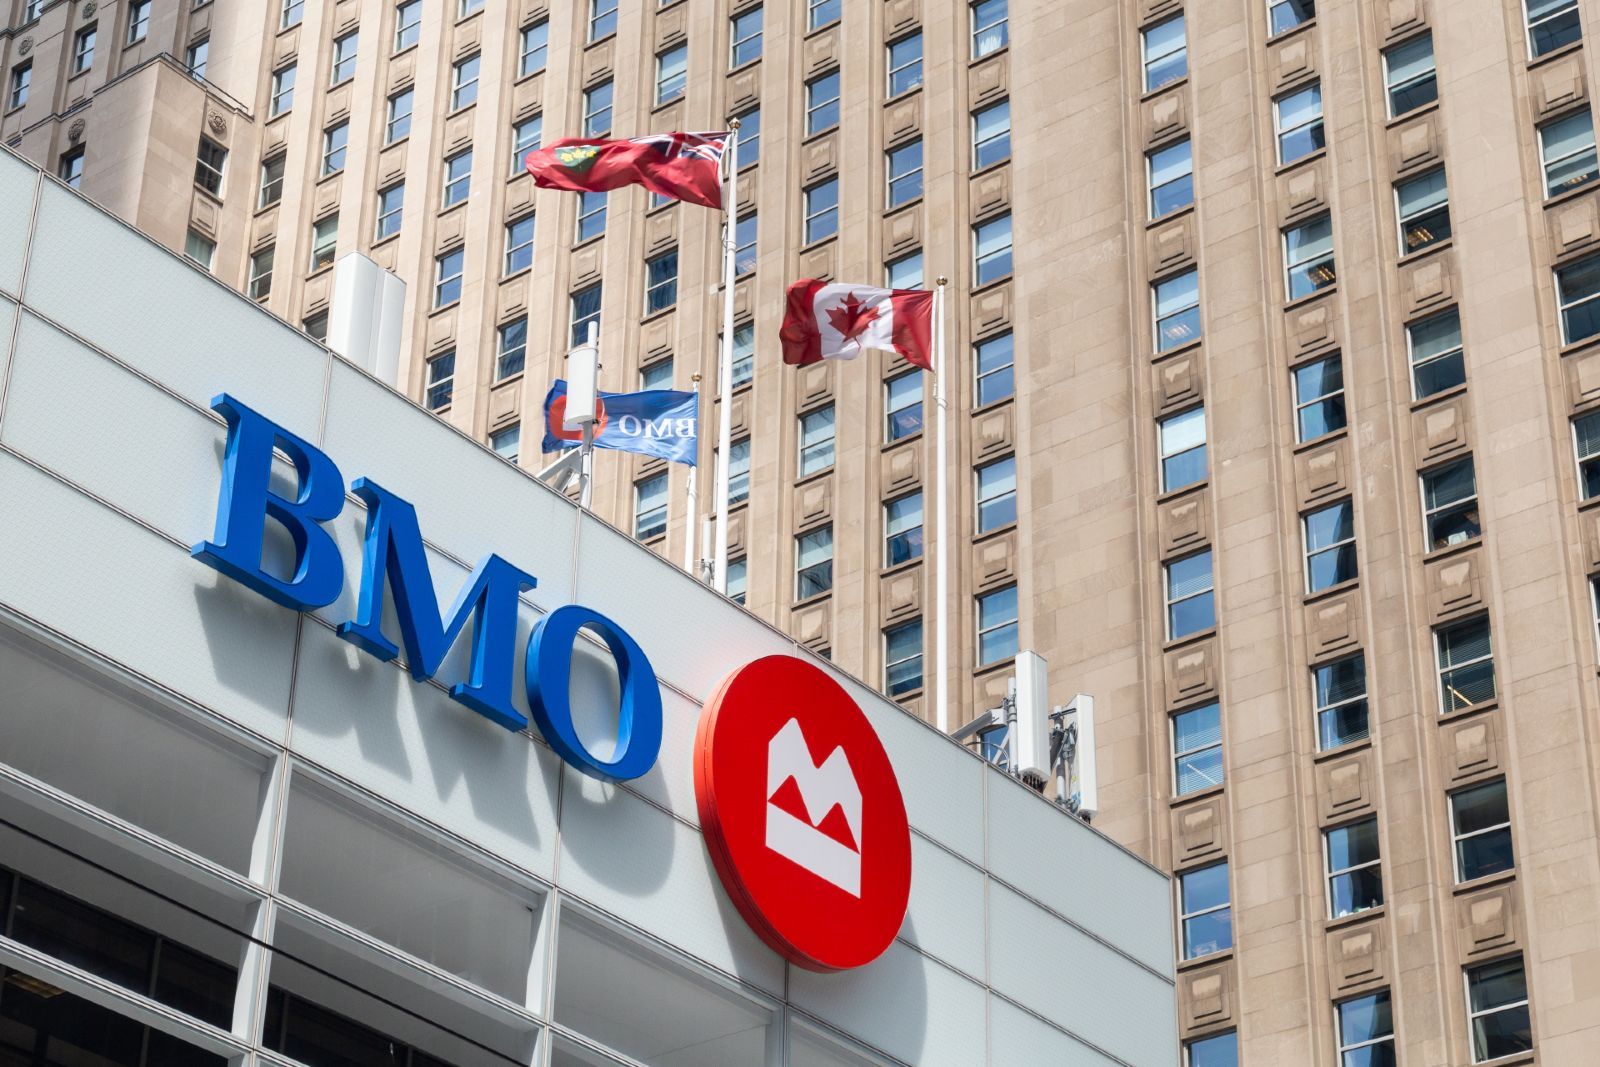 Flags fly atop a Bank of Montreal (BMO) building - BMO trust